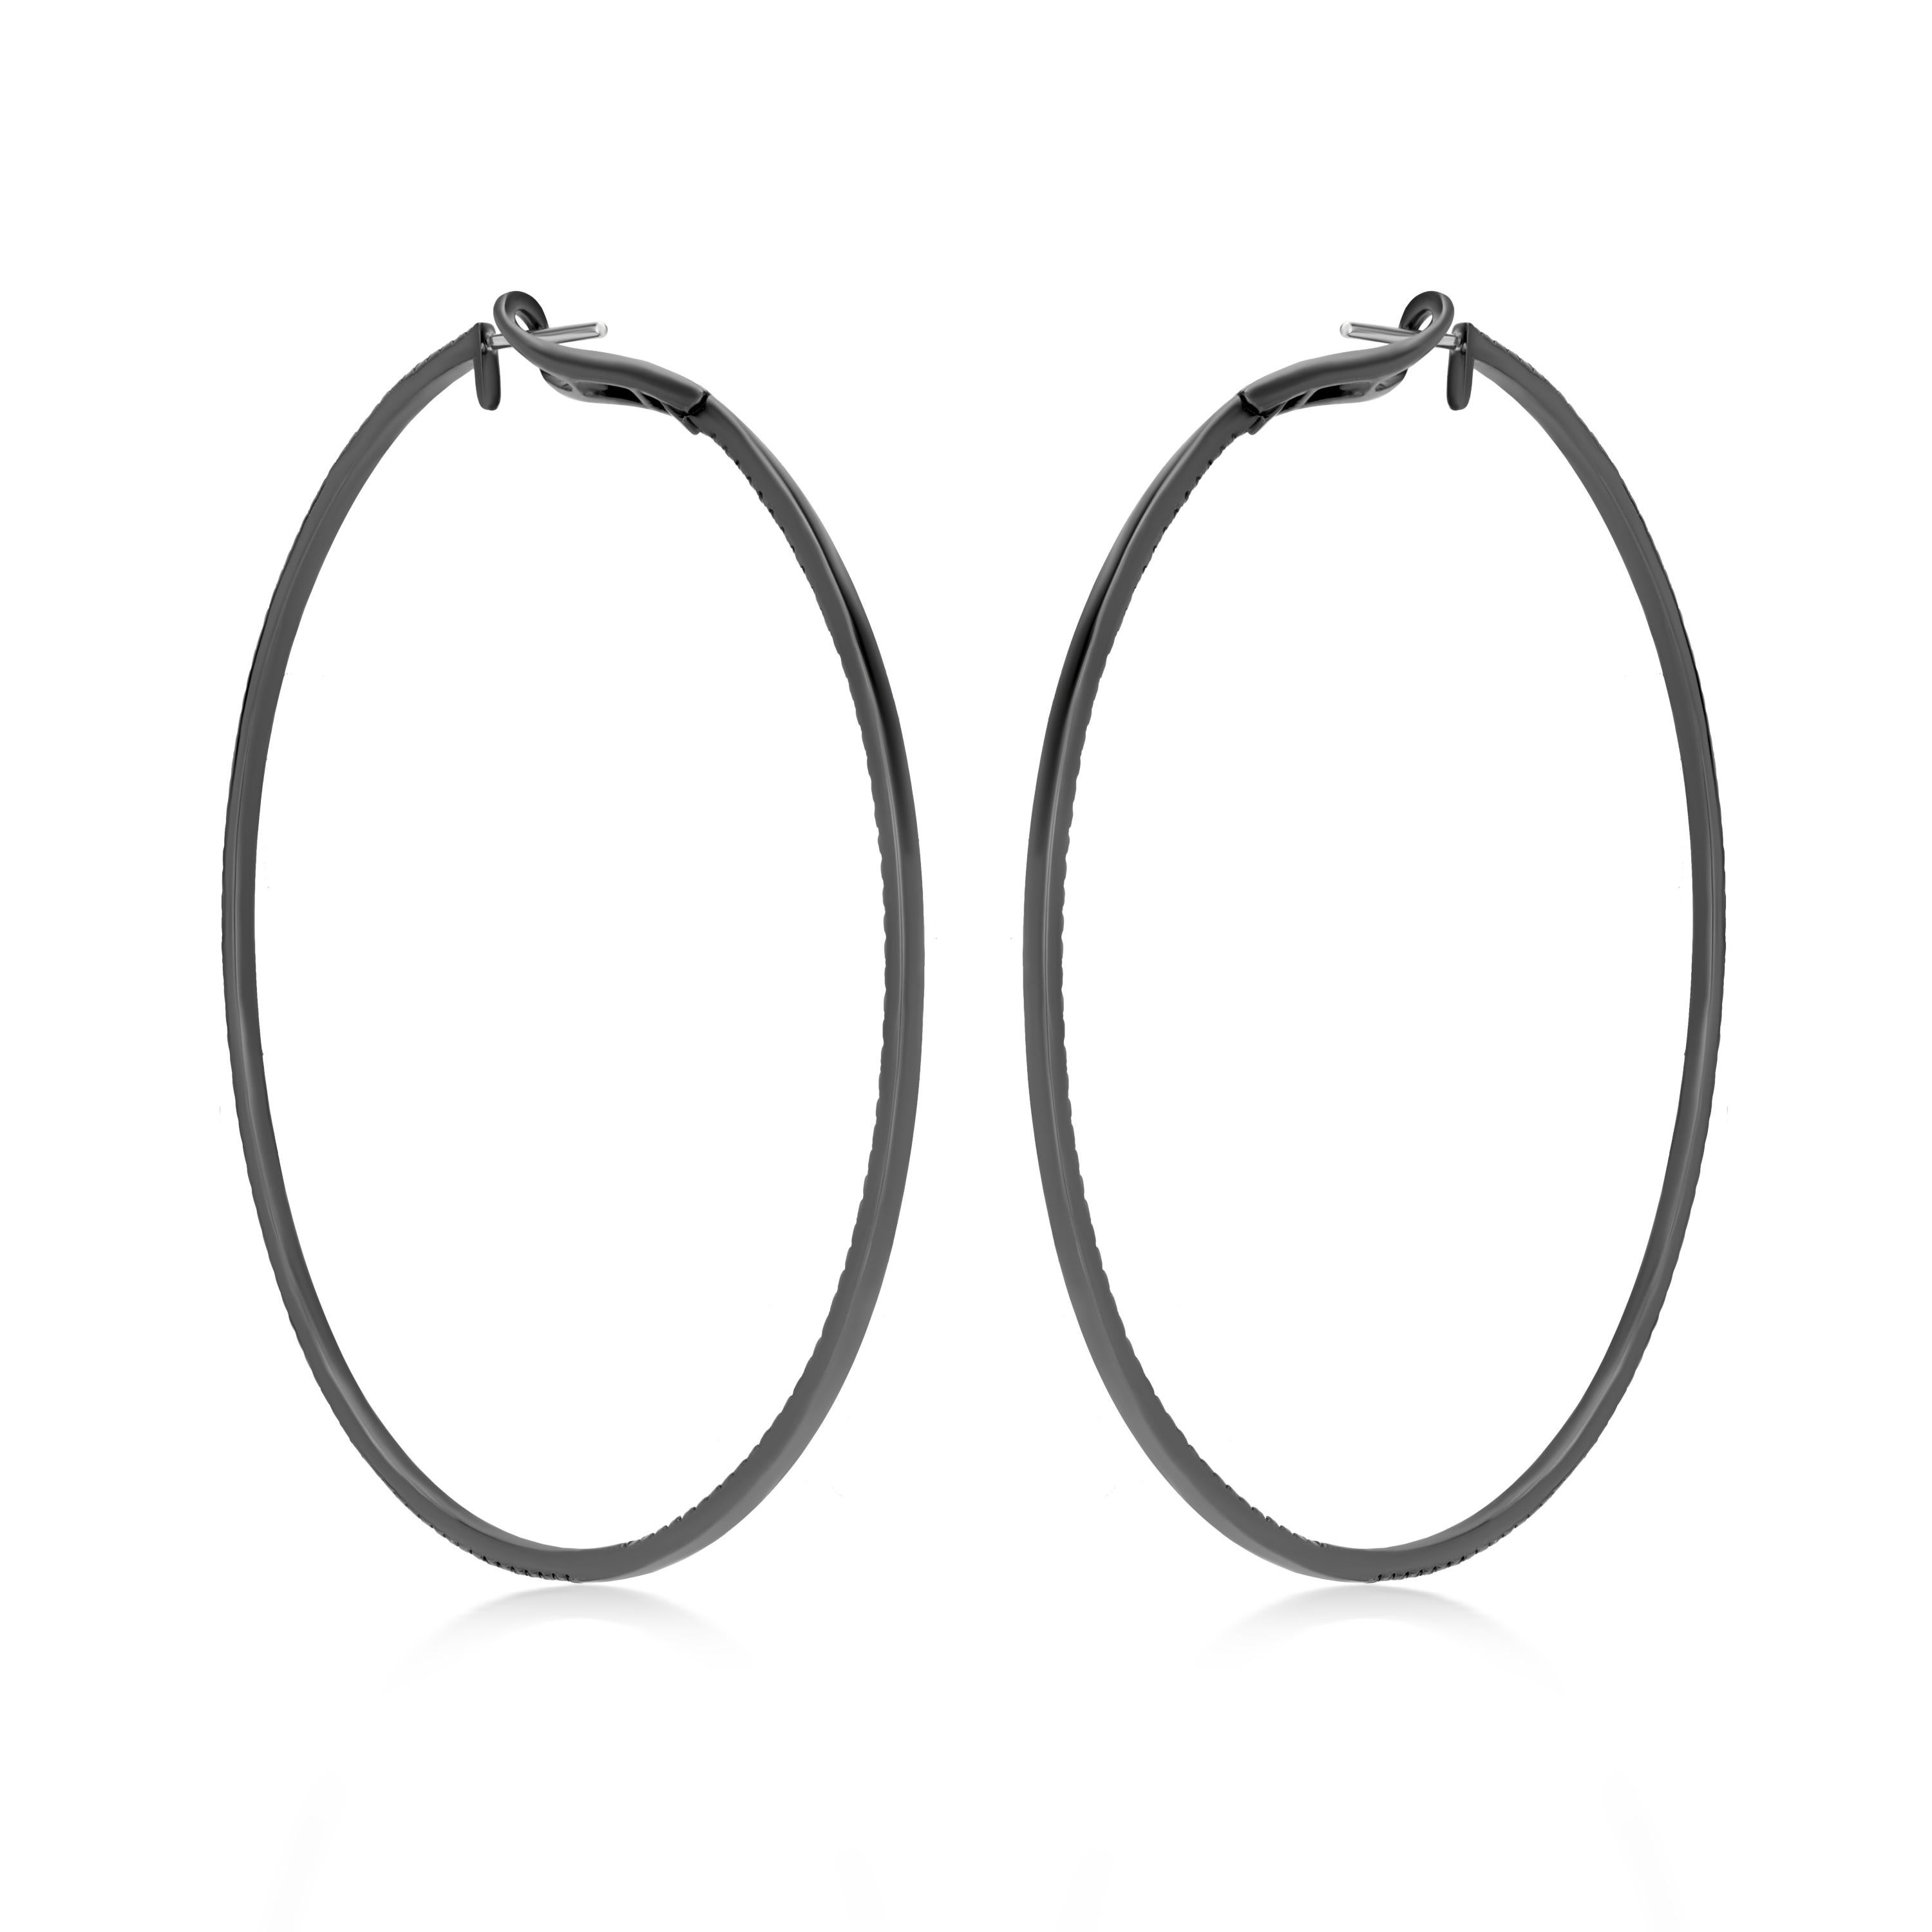 Your wardrobe deserves a little extra sparkle! Gleaming from the inside and outside, 2.46 ct. t.w. black diamond full cut rounds illuminate the polished black rhodium accentuated 18k gold oval hoops. Snap bar, black diamond hoop earrings.
Please